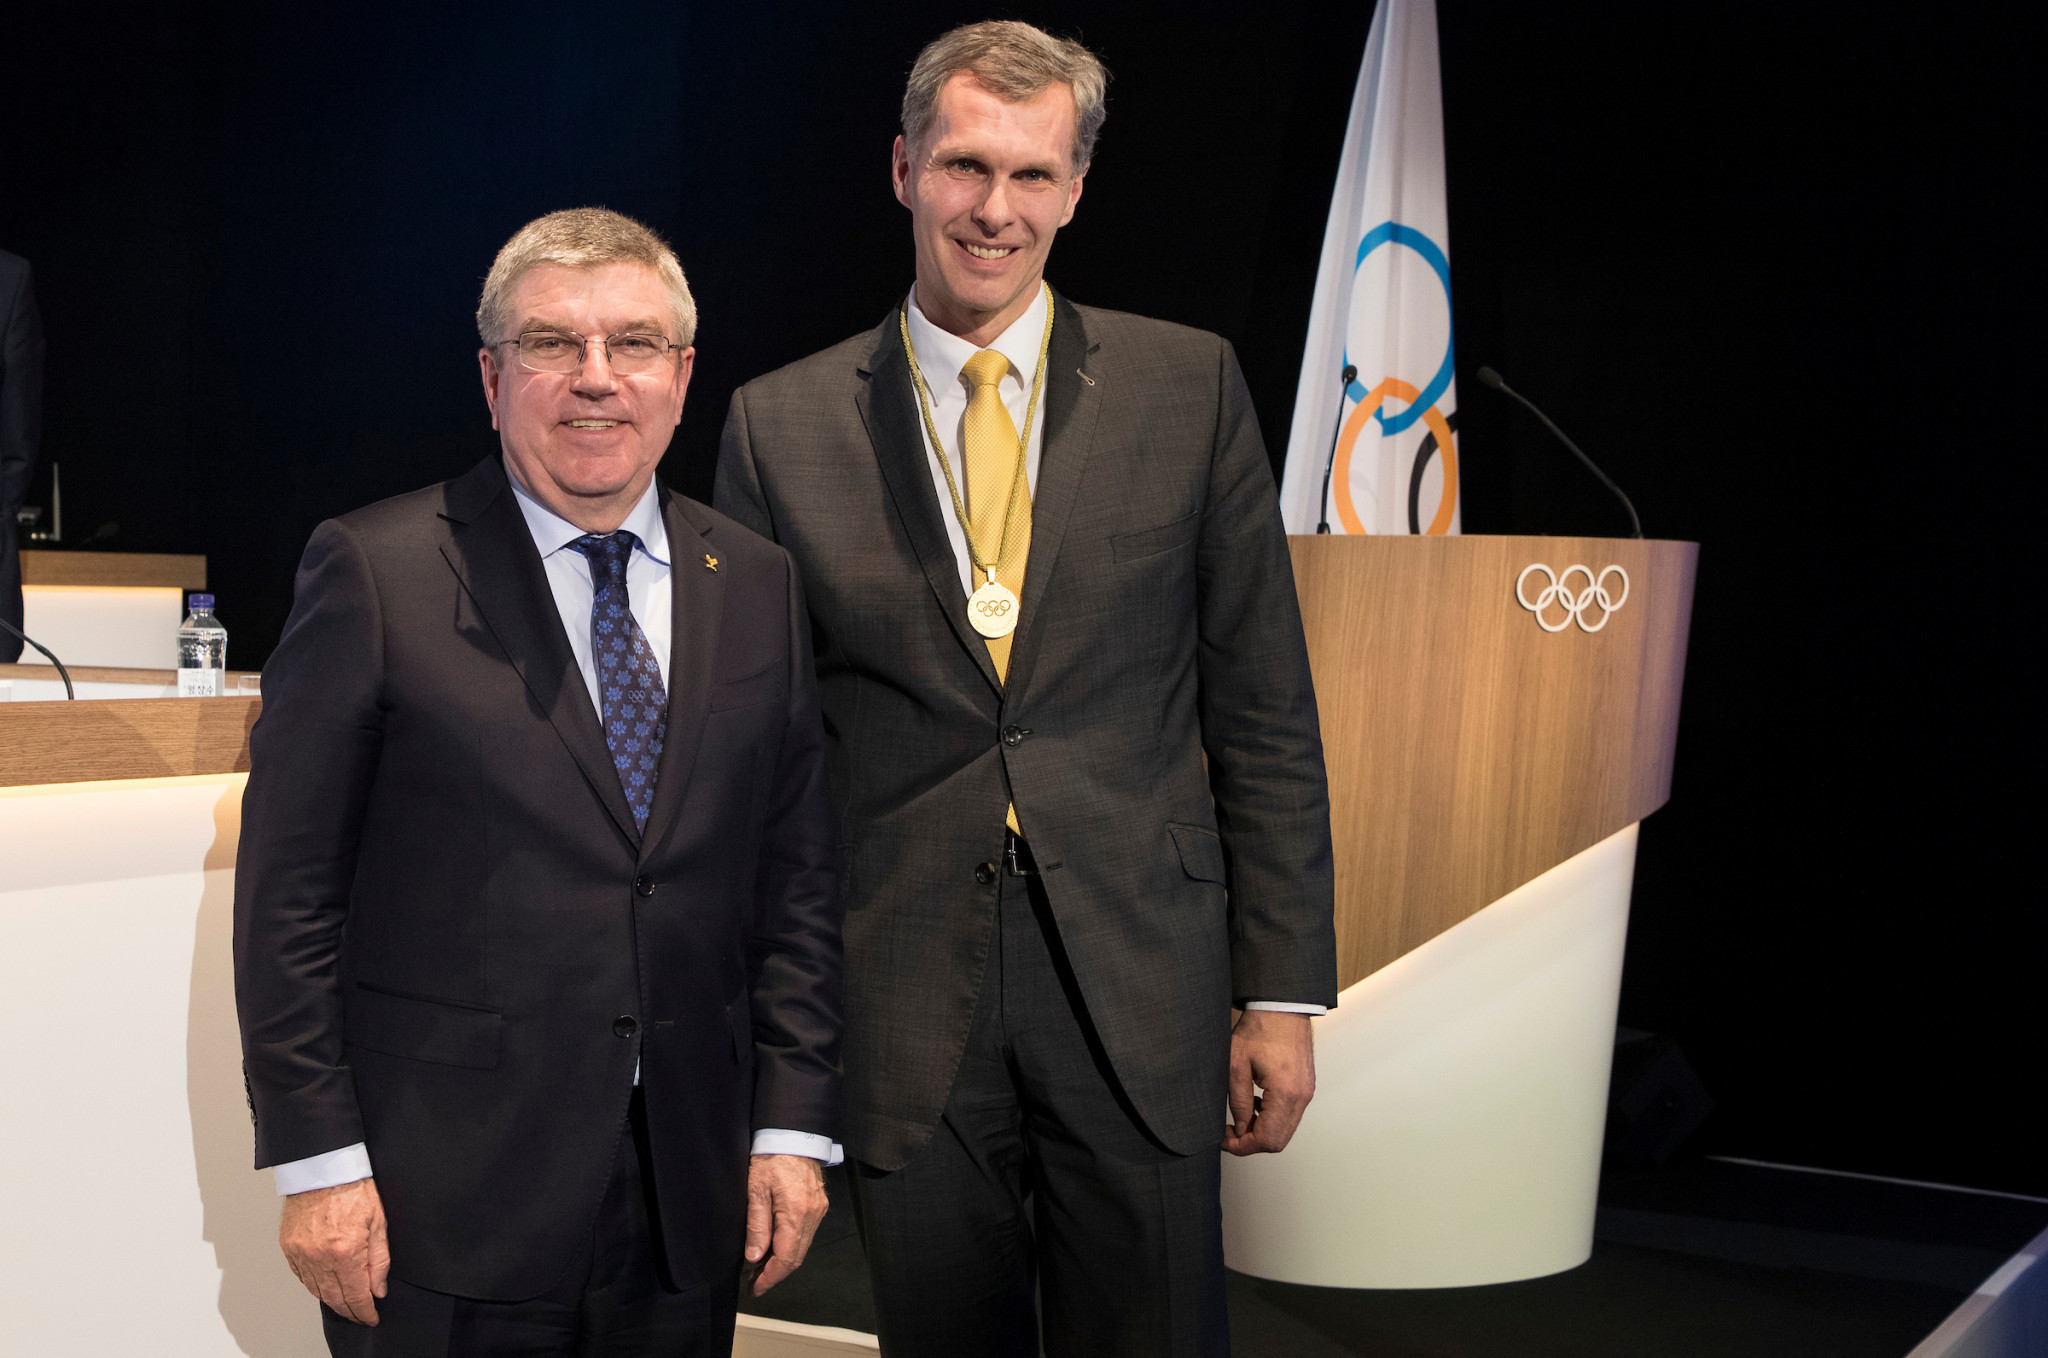 Jiří Kejval poses with IOC President Thomas Bach after being elected as a member in Pyeongchang ©IOC